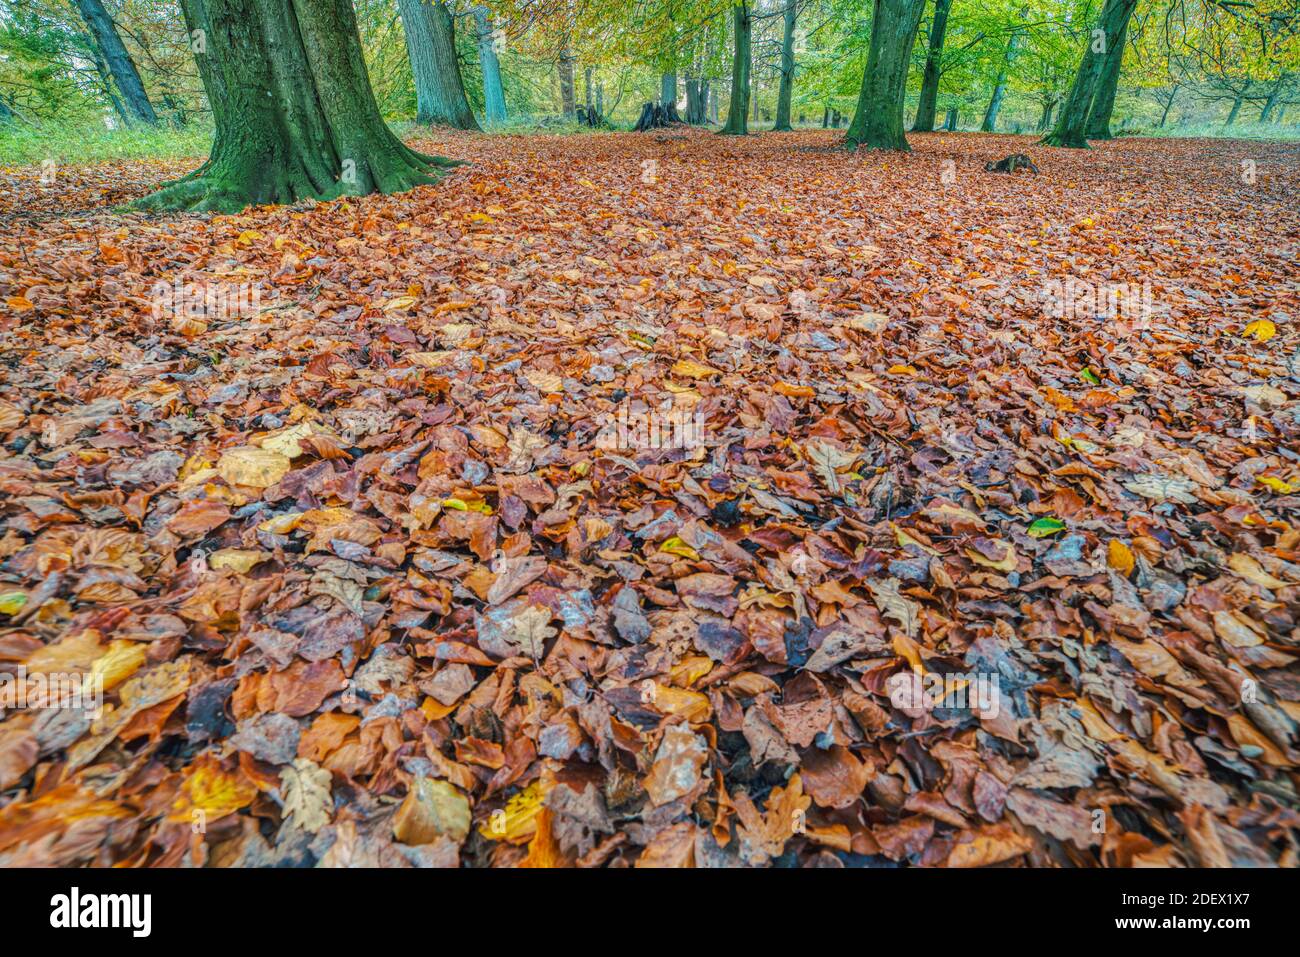 Leaves fall in the woods or foliage in Jaegersborg Dyrehave.  Autumnal illustration depicts a texture of dead leaves that suggests the autumn approach Stock Photo